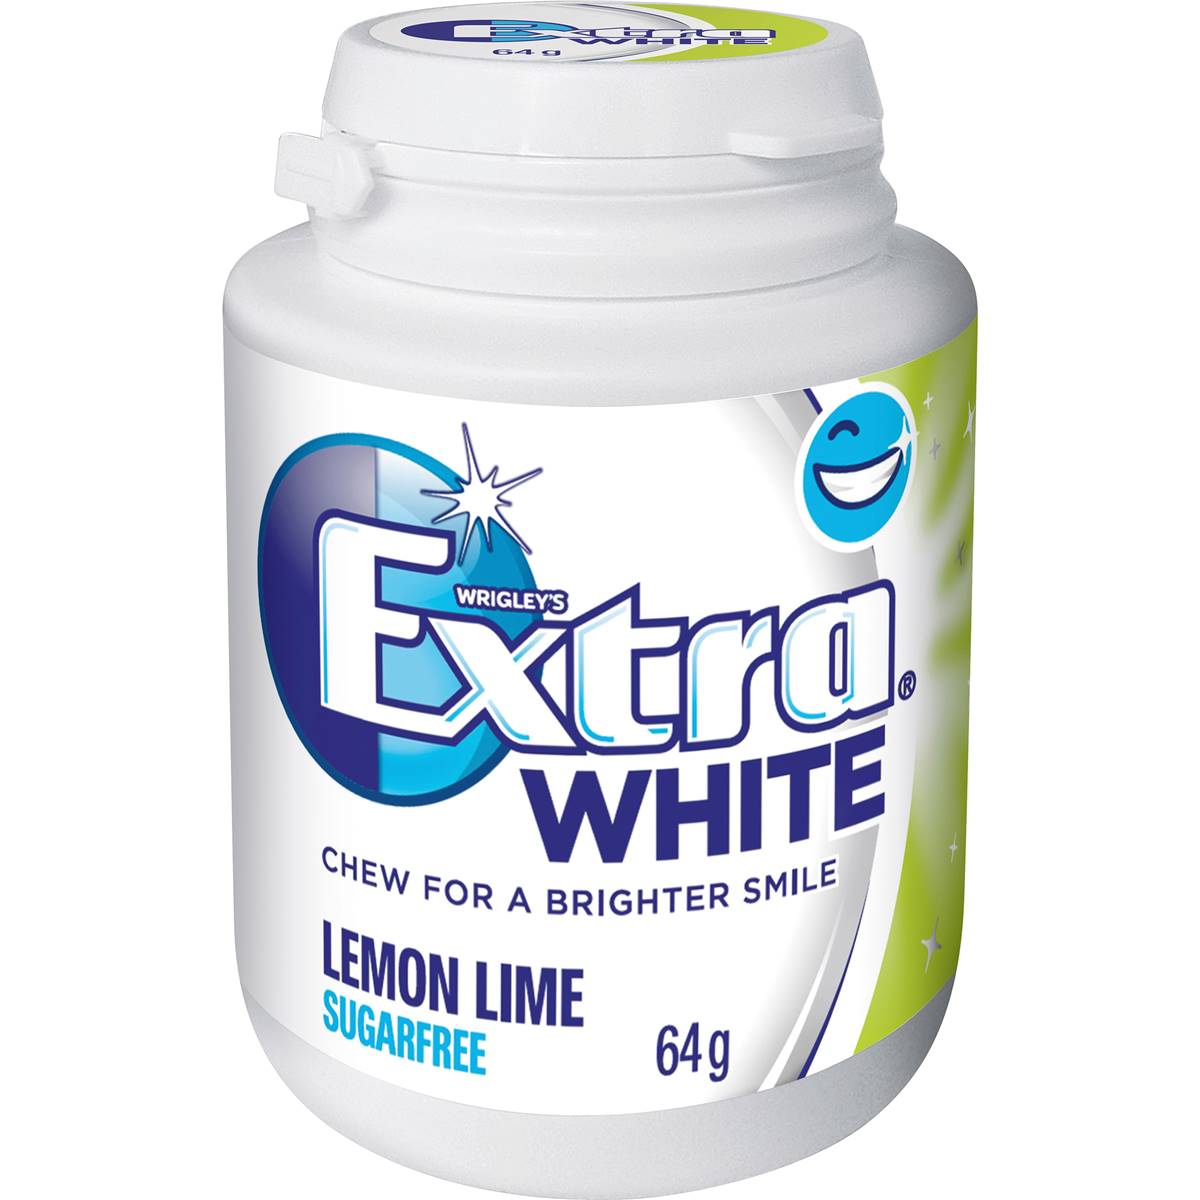 Calories in Extra White Lemon Lime Chewing Gum Sugar Free Bottle